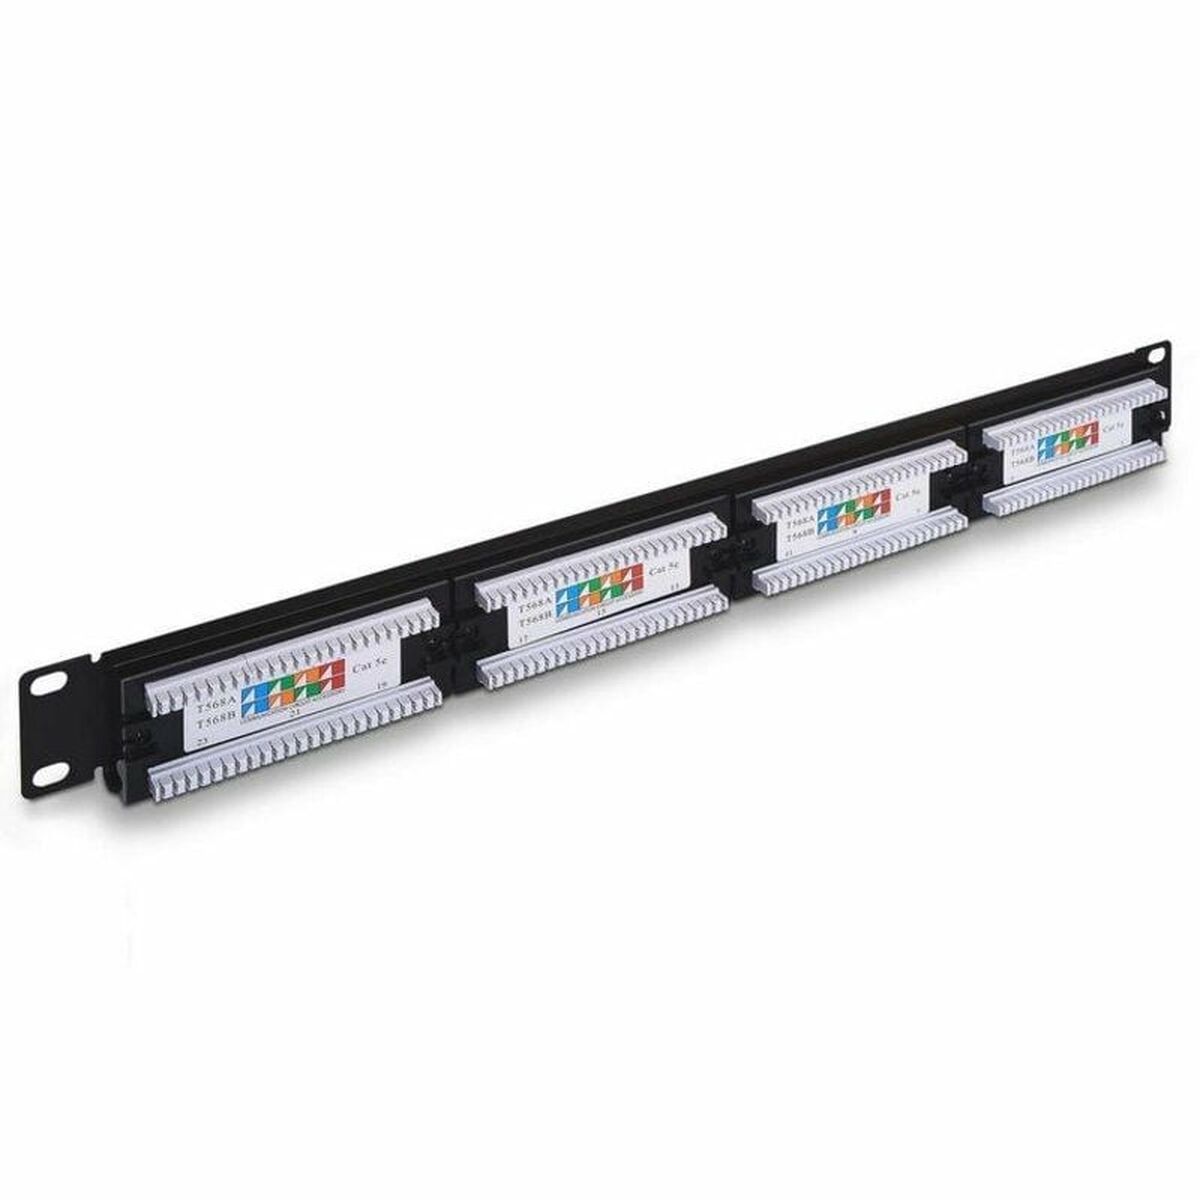 24-port UTP Category 5e Patch Panel Aisens A141-0307, Aisens, Computing, Accessories, 24-port-utp-category-5e-patch-panel-aisens-a141-0307, Brand_Aisens, category-reference-2609, category-reference-2803, category-reference-2828, category-reference-t-19685, category-reference-t-19908, category-reference-t-21349, Condition_NEW, furniture, networks/wiring, organisation, Price_20 - 50, Teleworking, RiotNook